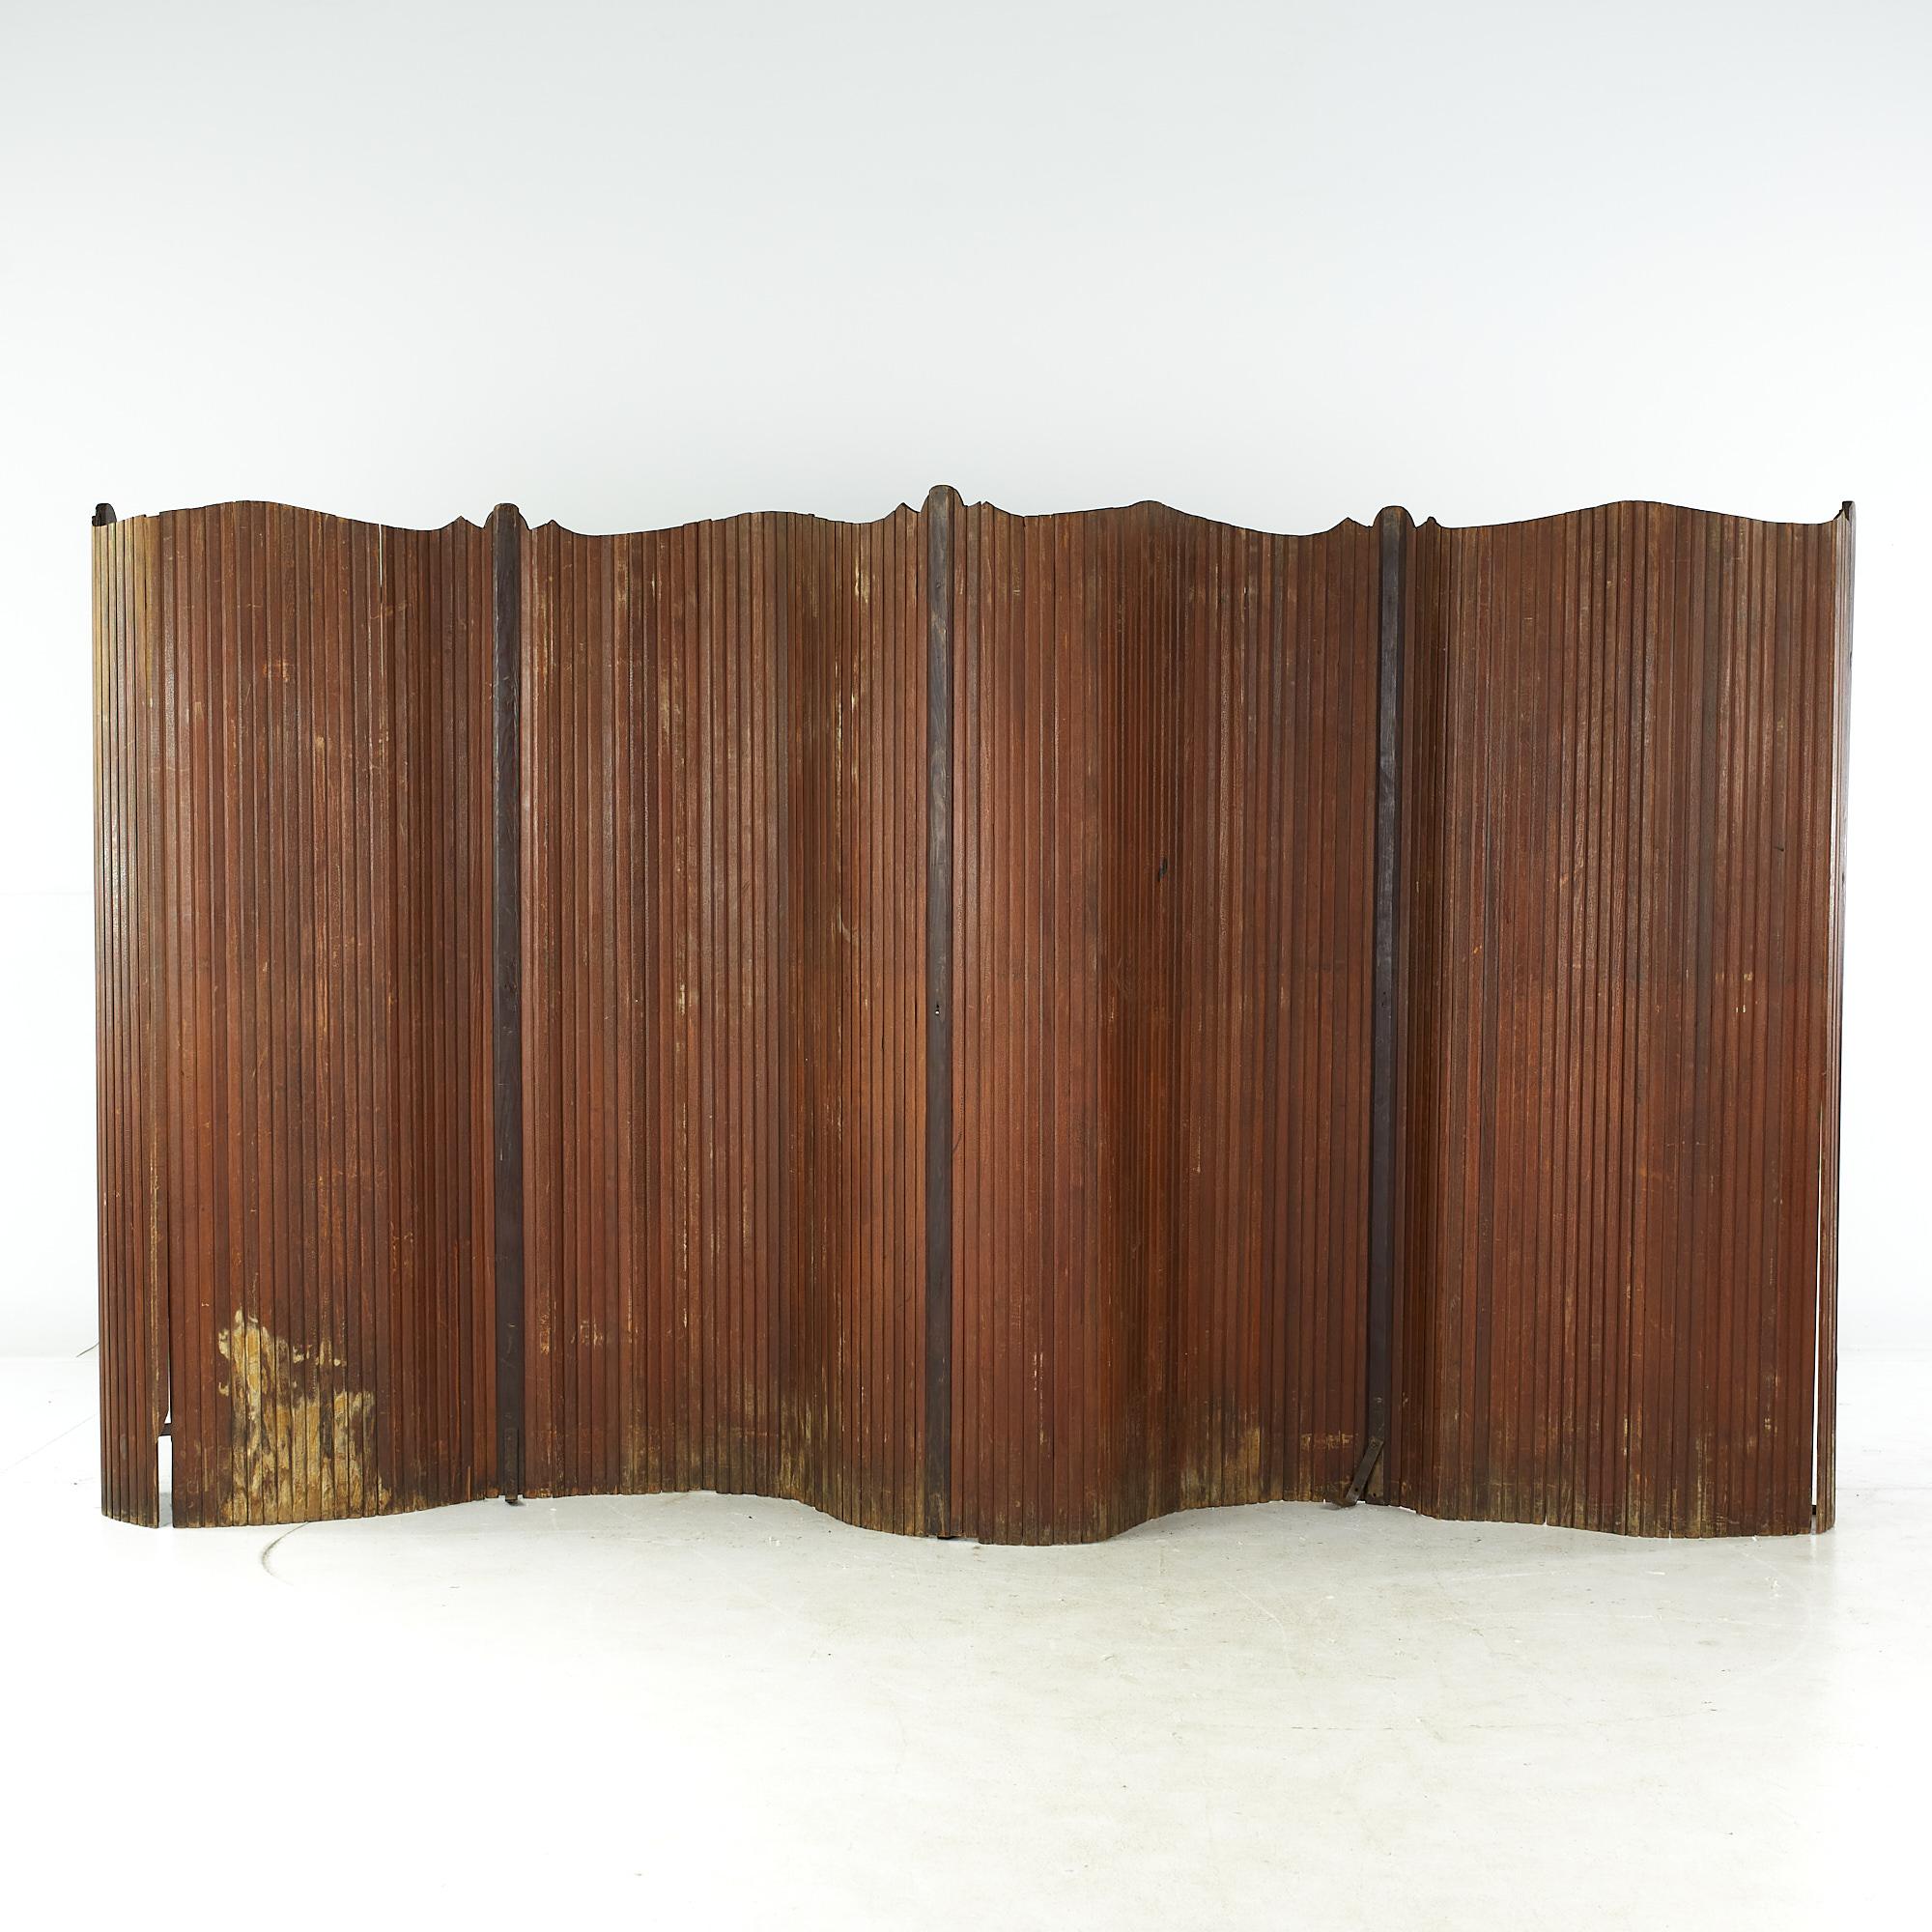 Baumann Fils & Cie midcentury Paravent Paris room divider screen

This room divider measures: 142 wide x 1 deep x 63.5 inches high

All pieces of furniture can be had in what we call restored vintage condition. That means the piece is restored